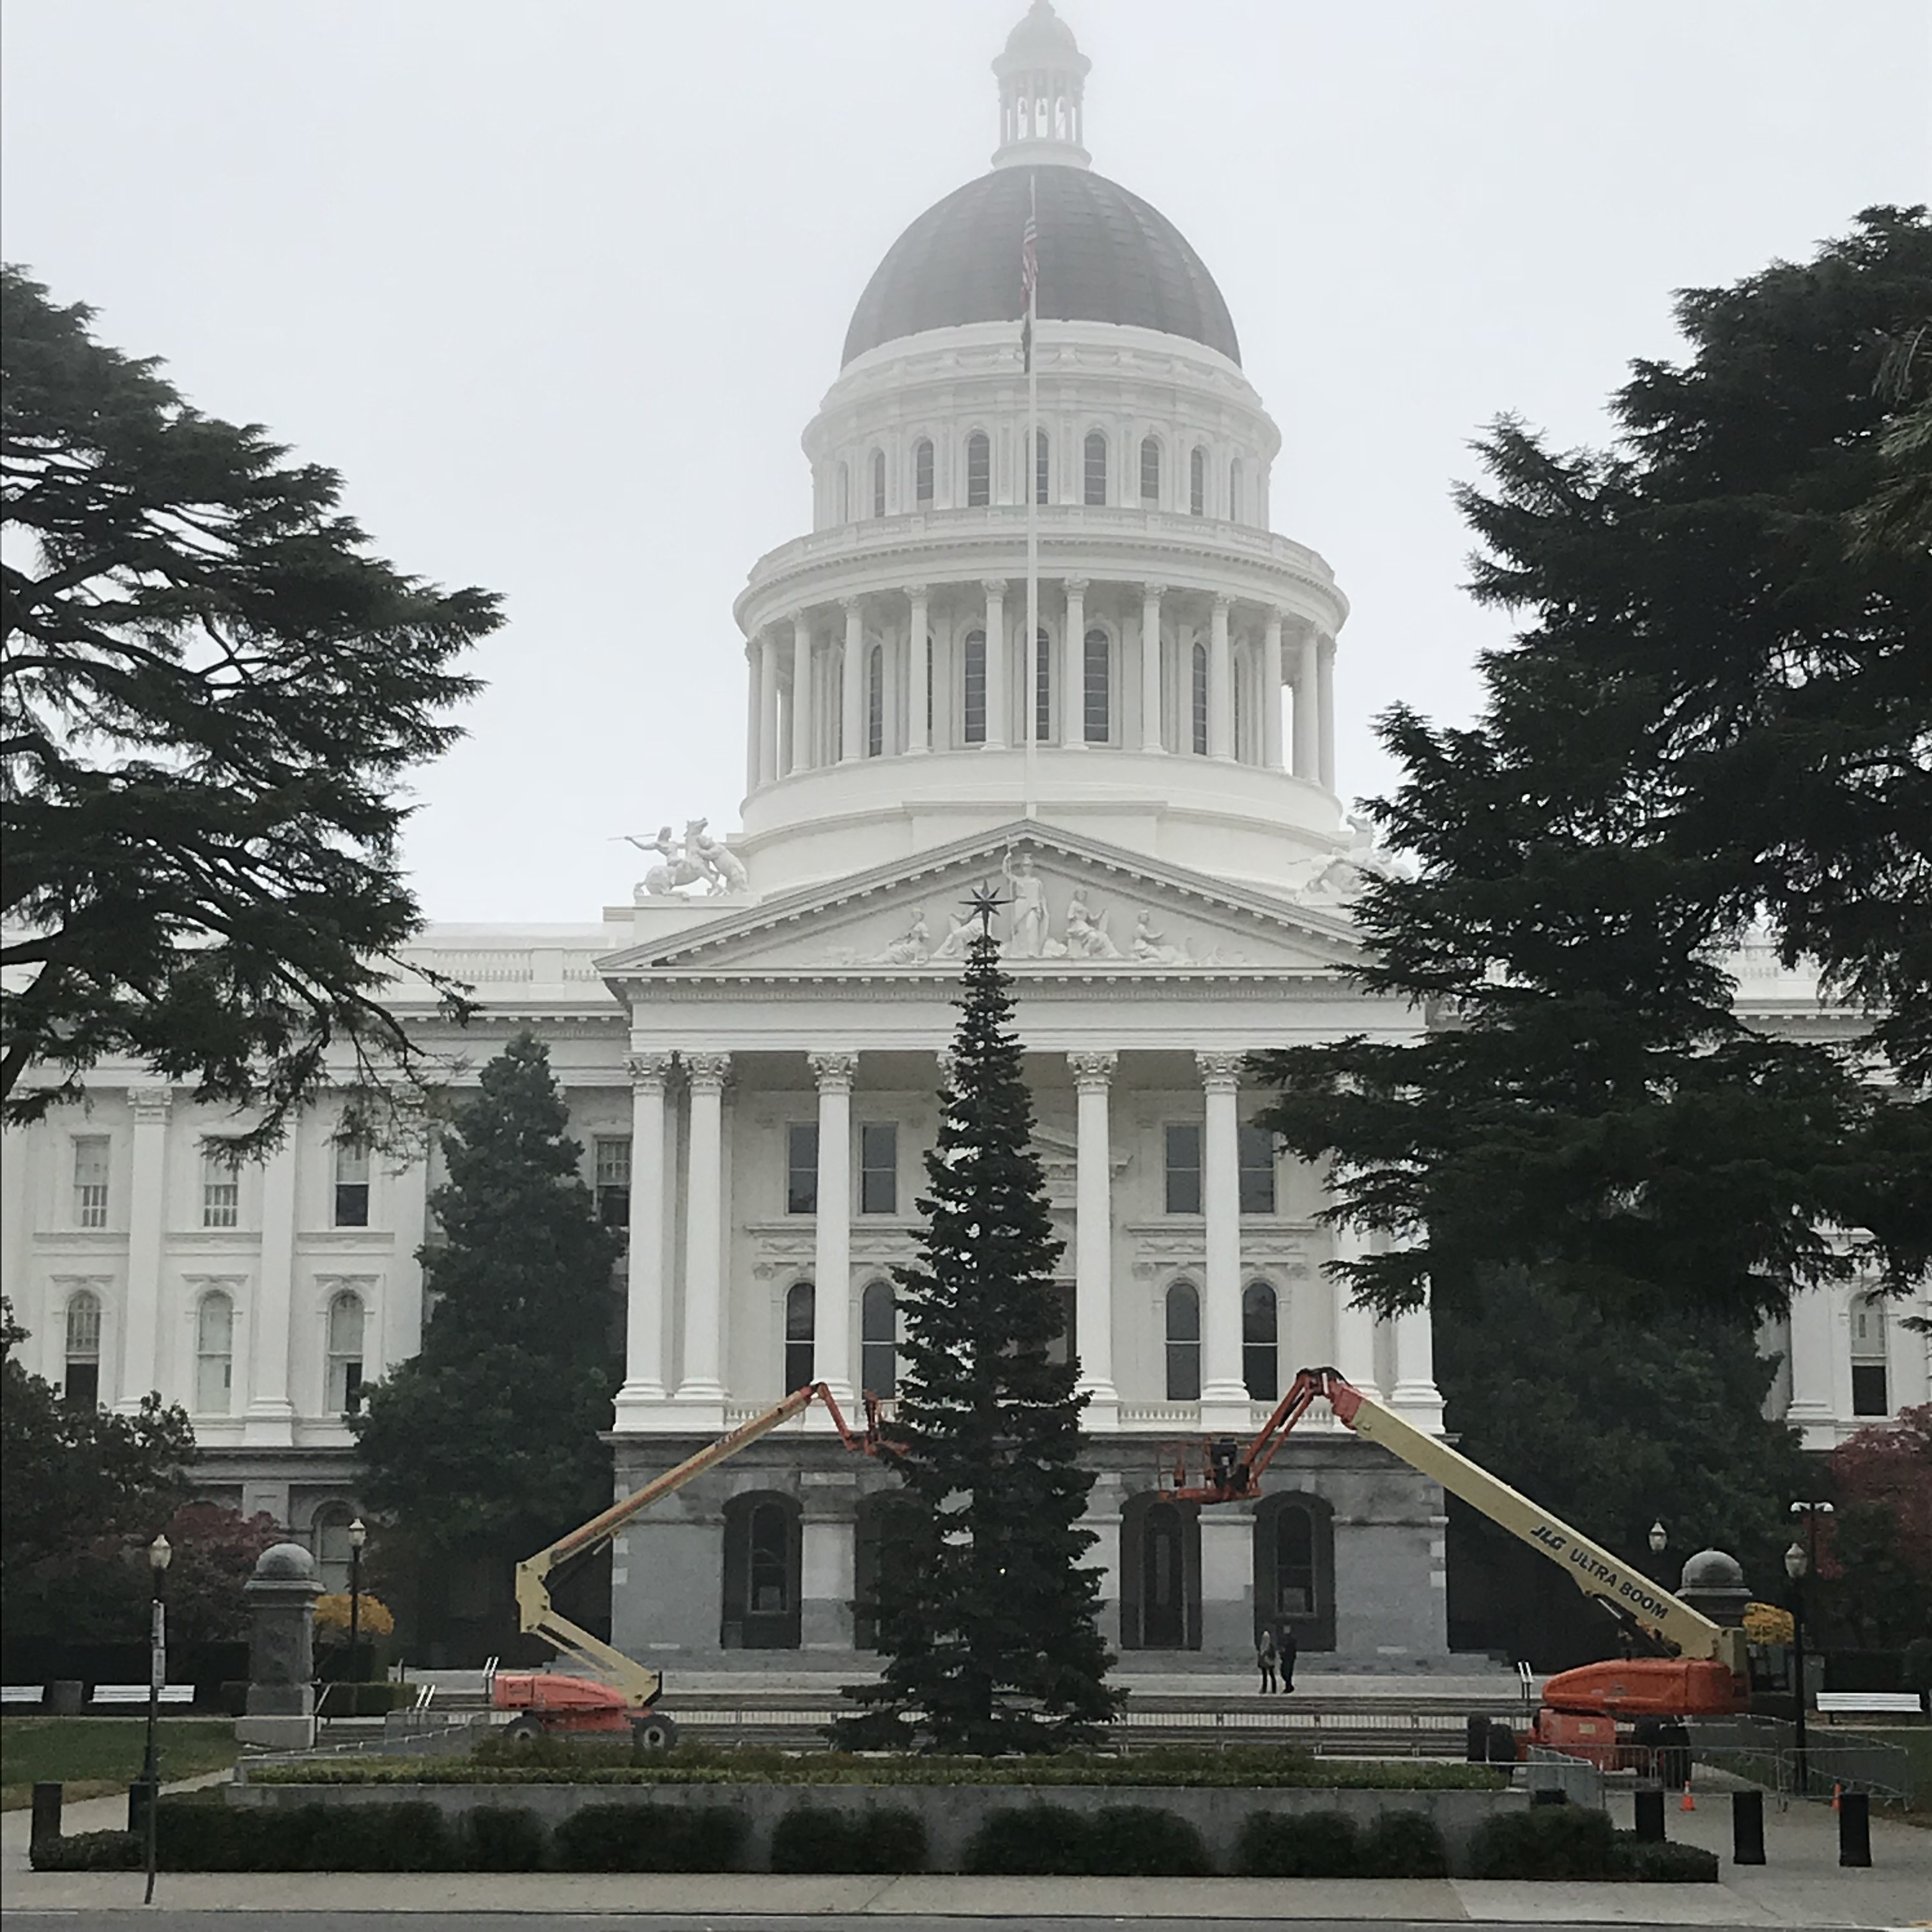 Workers setting up for the tree lighting at the capitol